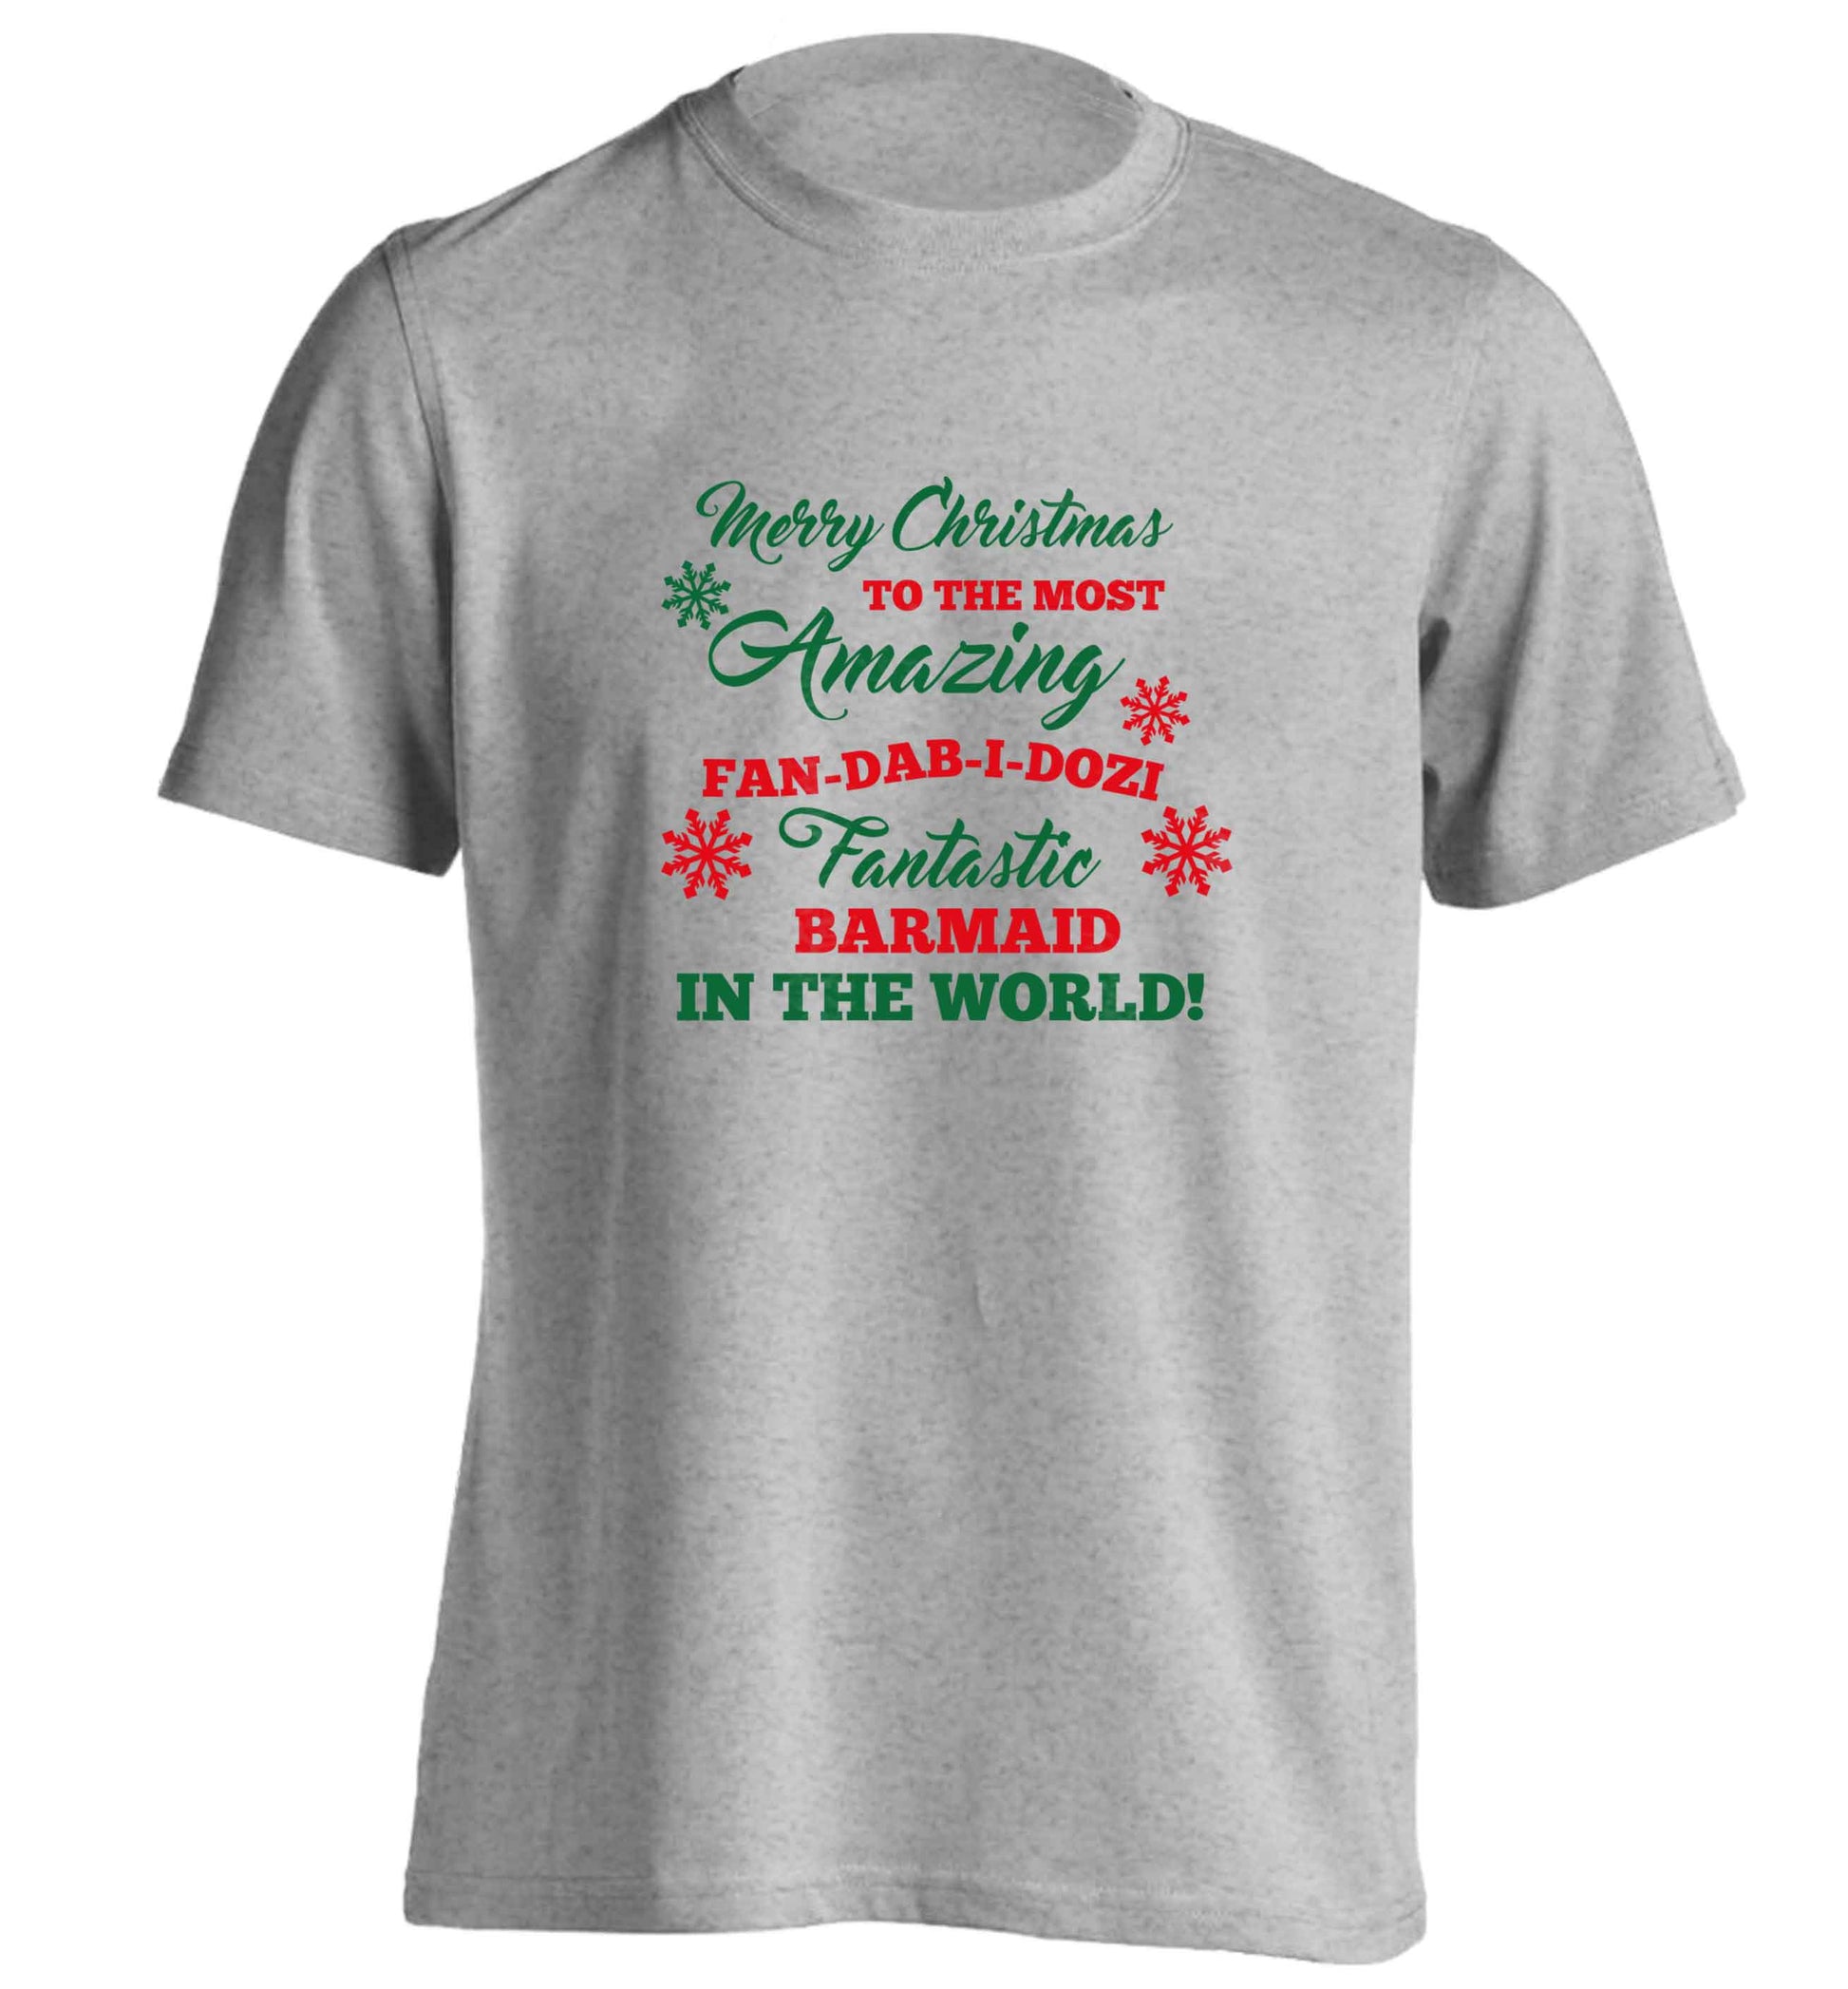 Merry Christmas to the most amazing barmaid in the world! adults unisex grey Tshirt 2XL